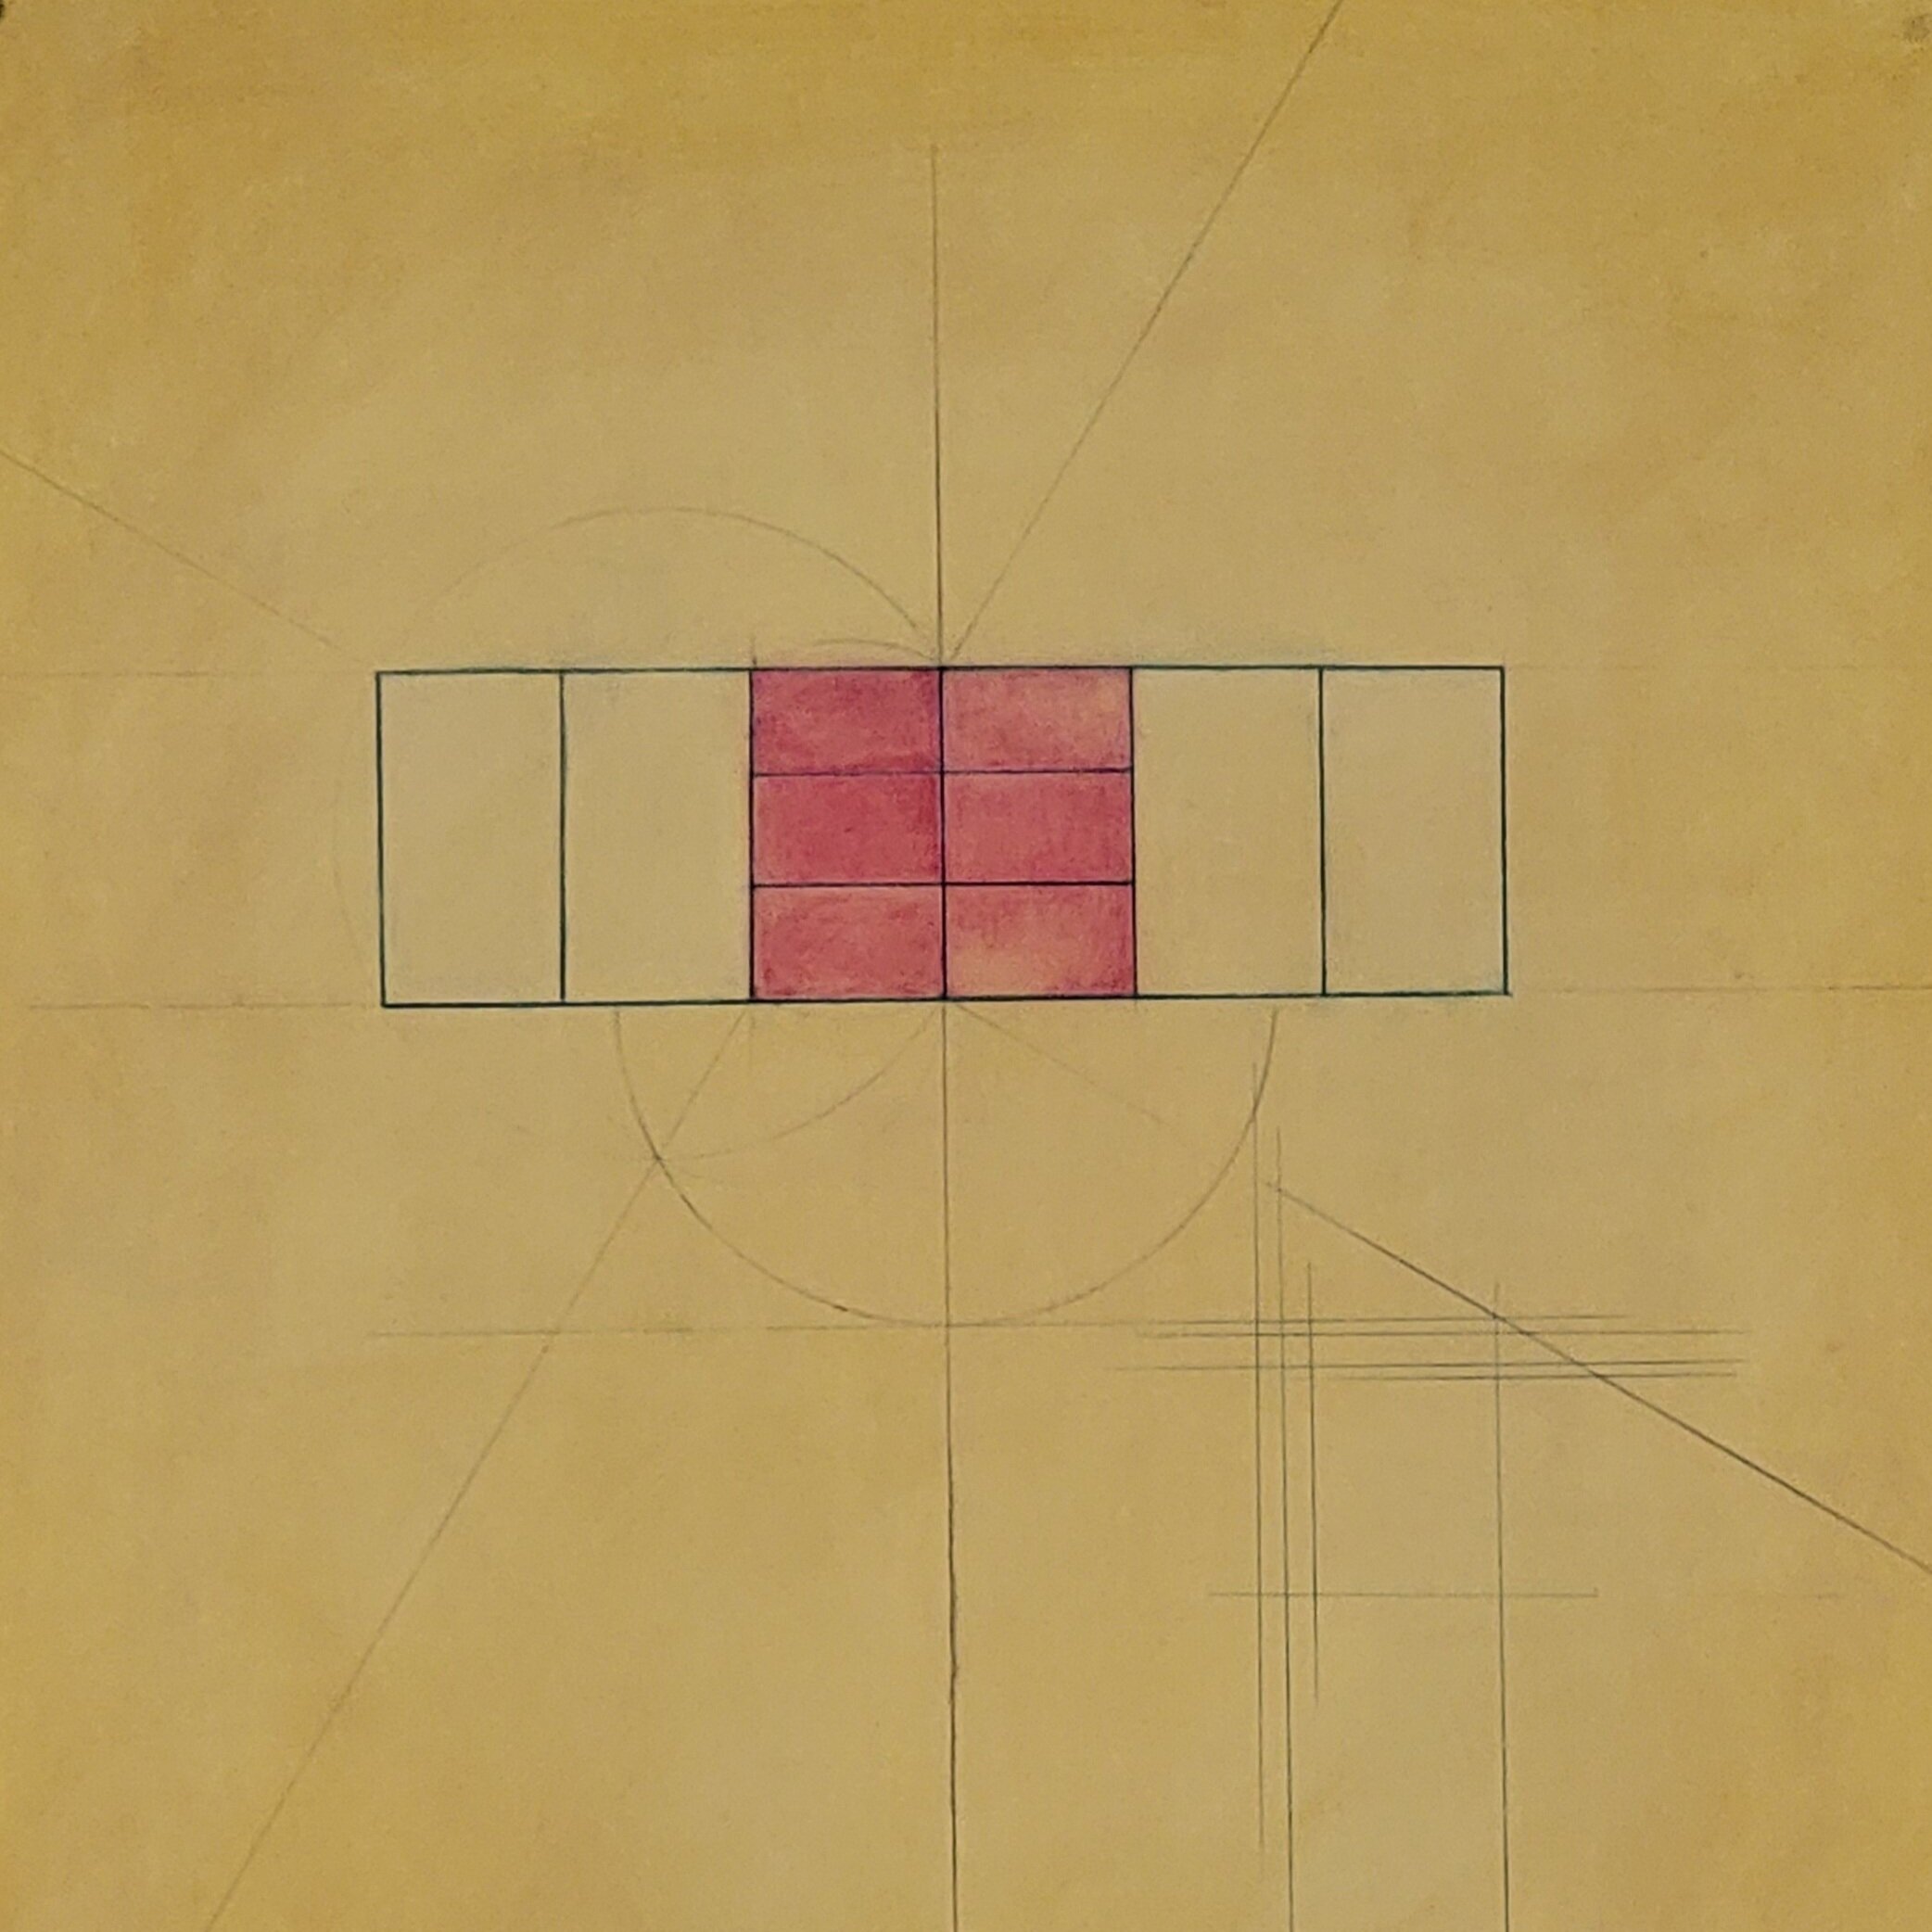 Barton_Golden+ratio+with+pink+square+2023+oil+on+paper+with+color+pencil+30x24+20230610_151922+%281%29.jpg